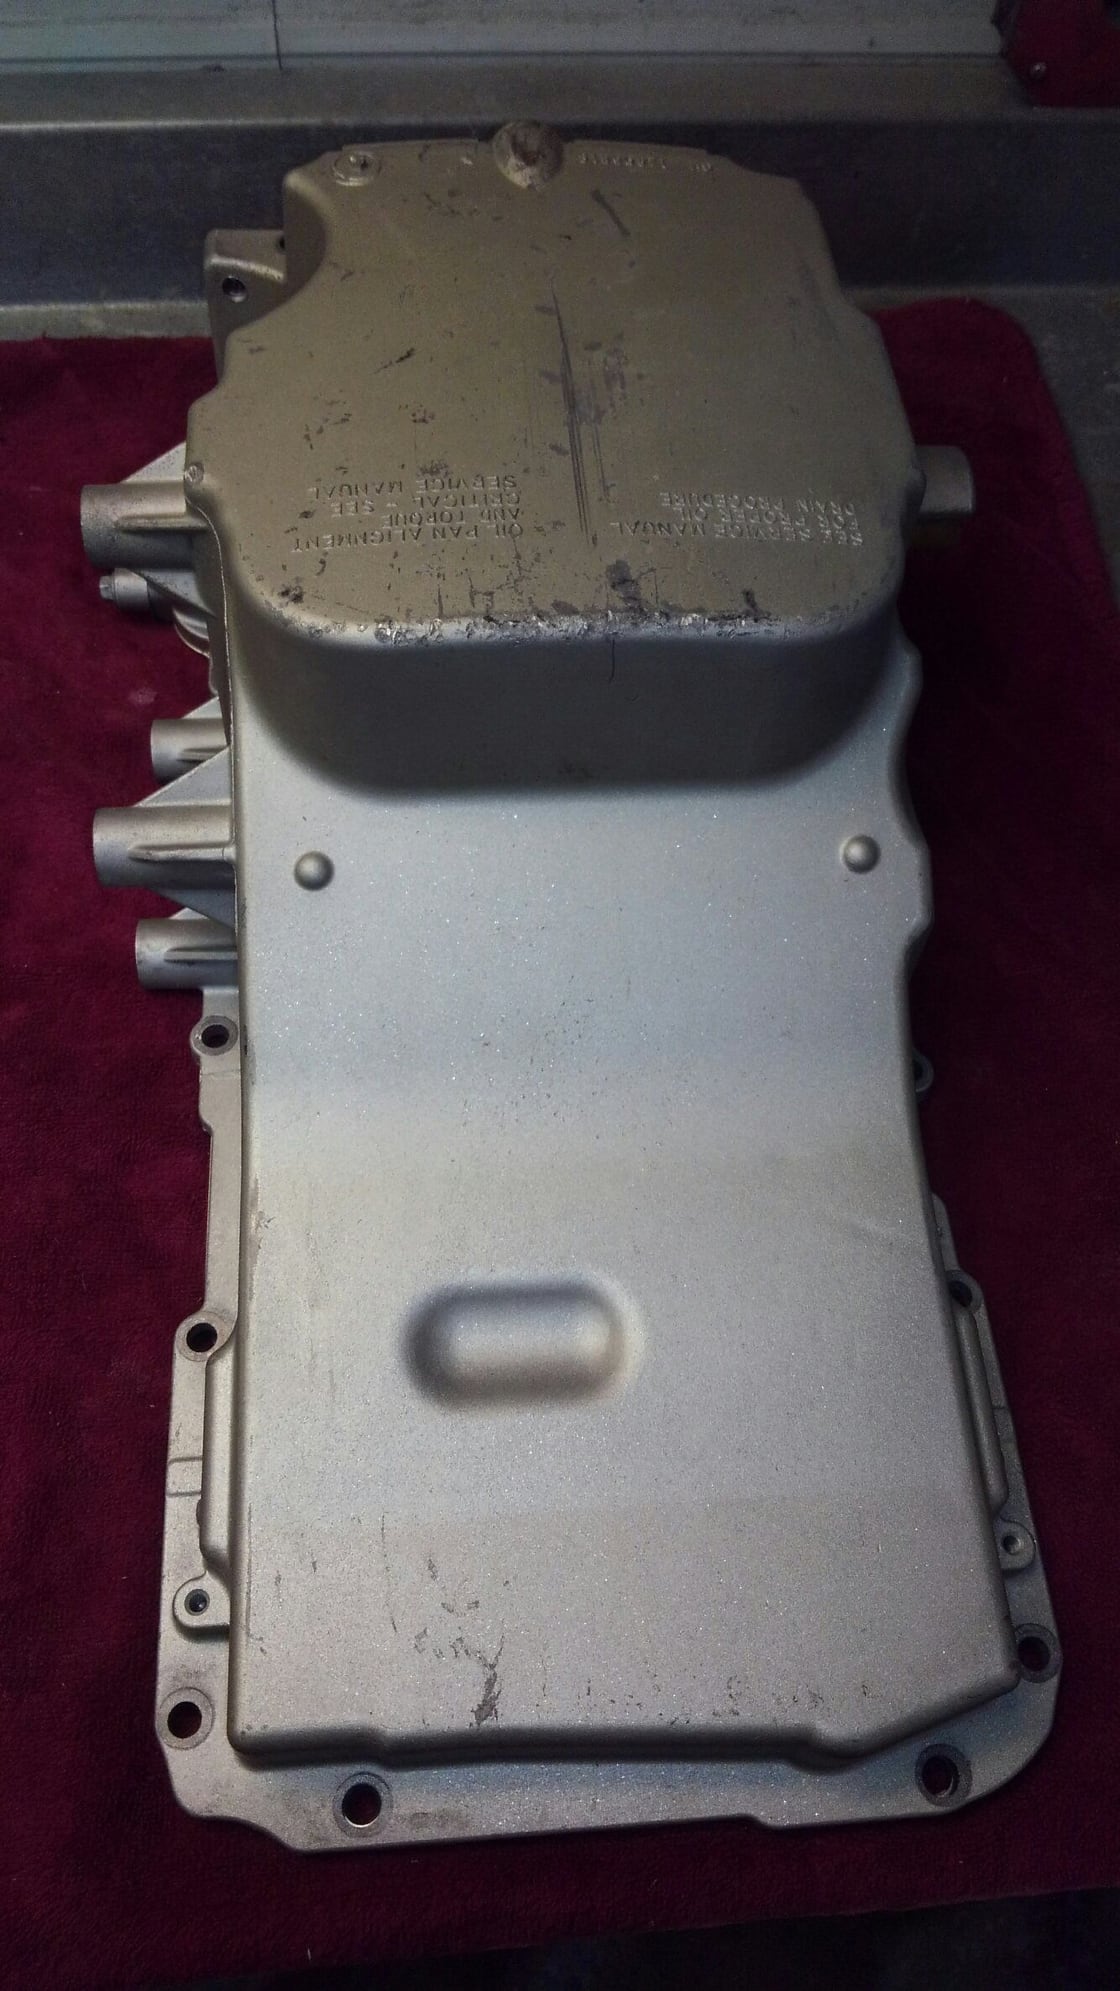  - cadillac cts-v oil pan - Rugby, ND 58368, United States